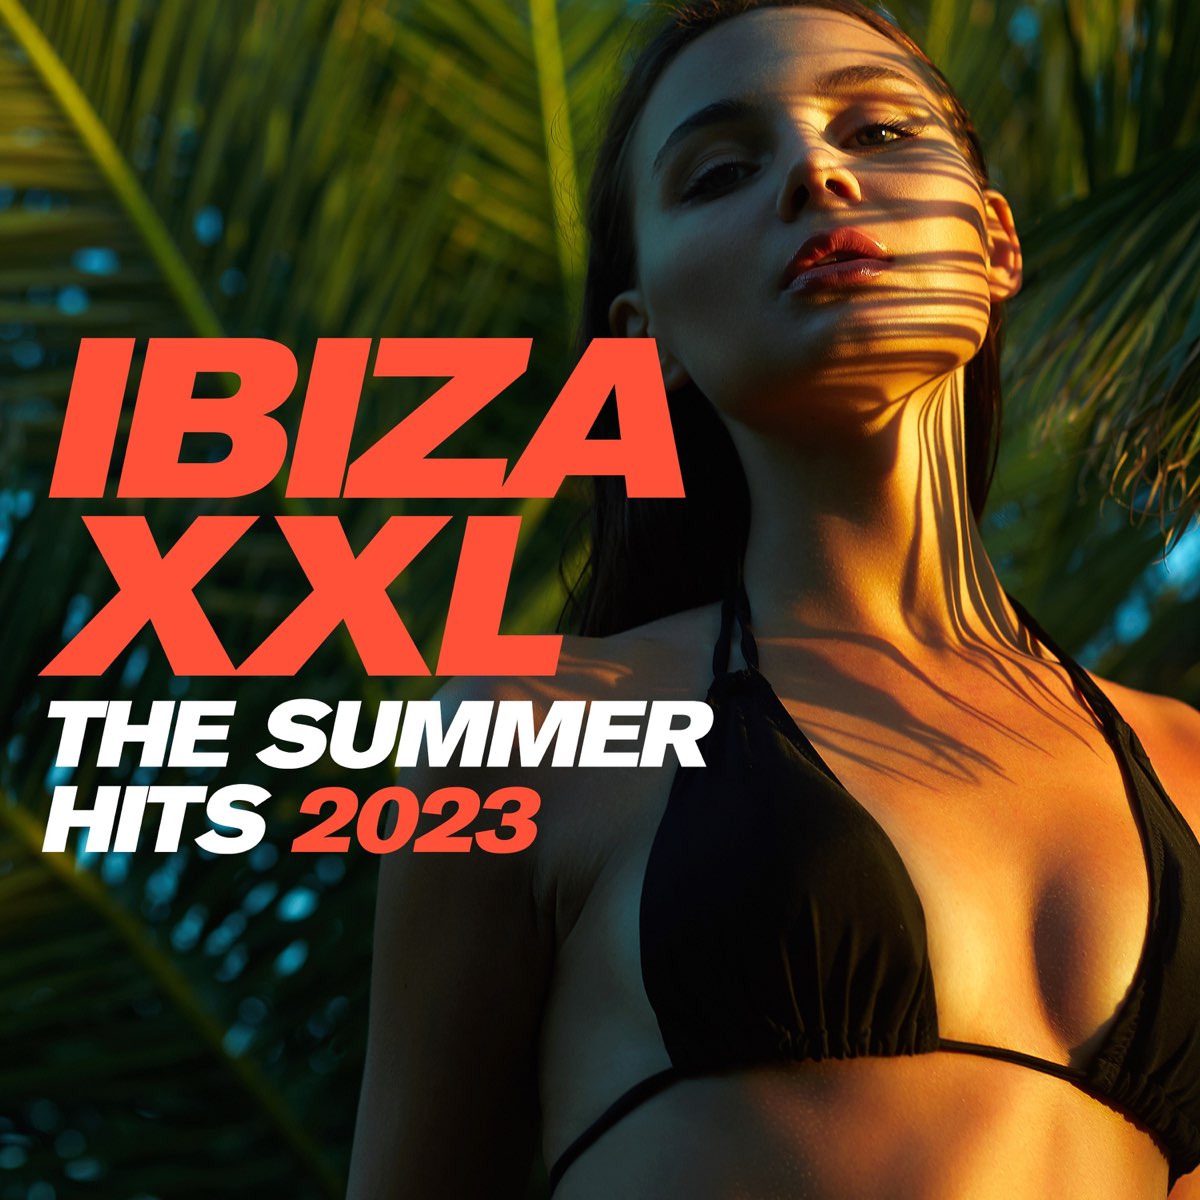 Ibiza XXL - The Summer Hits 2023 - Album by Various Artists - Apple Music